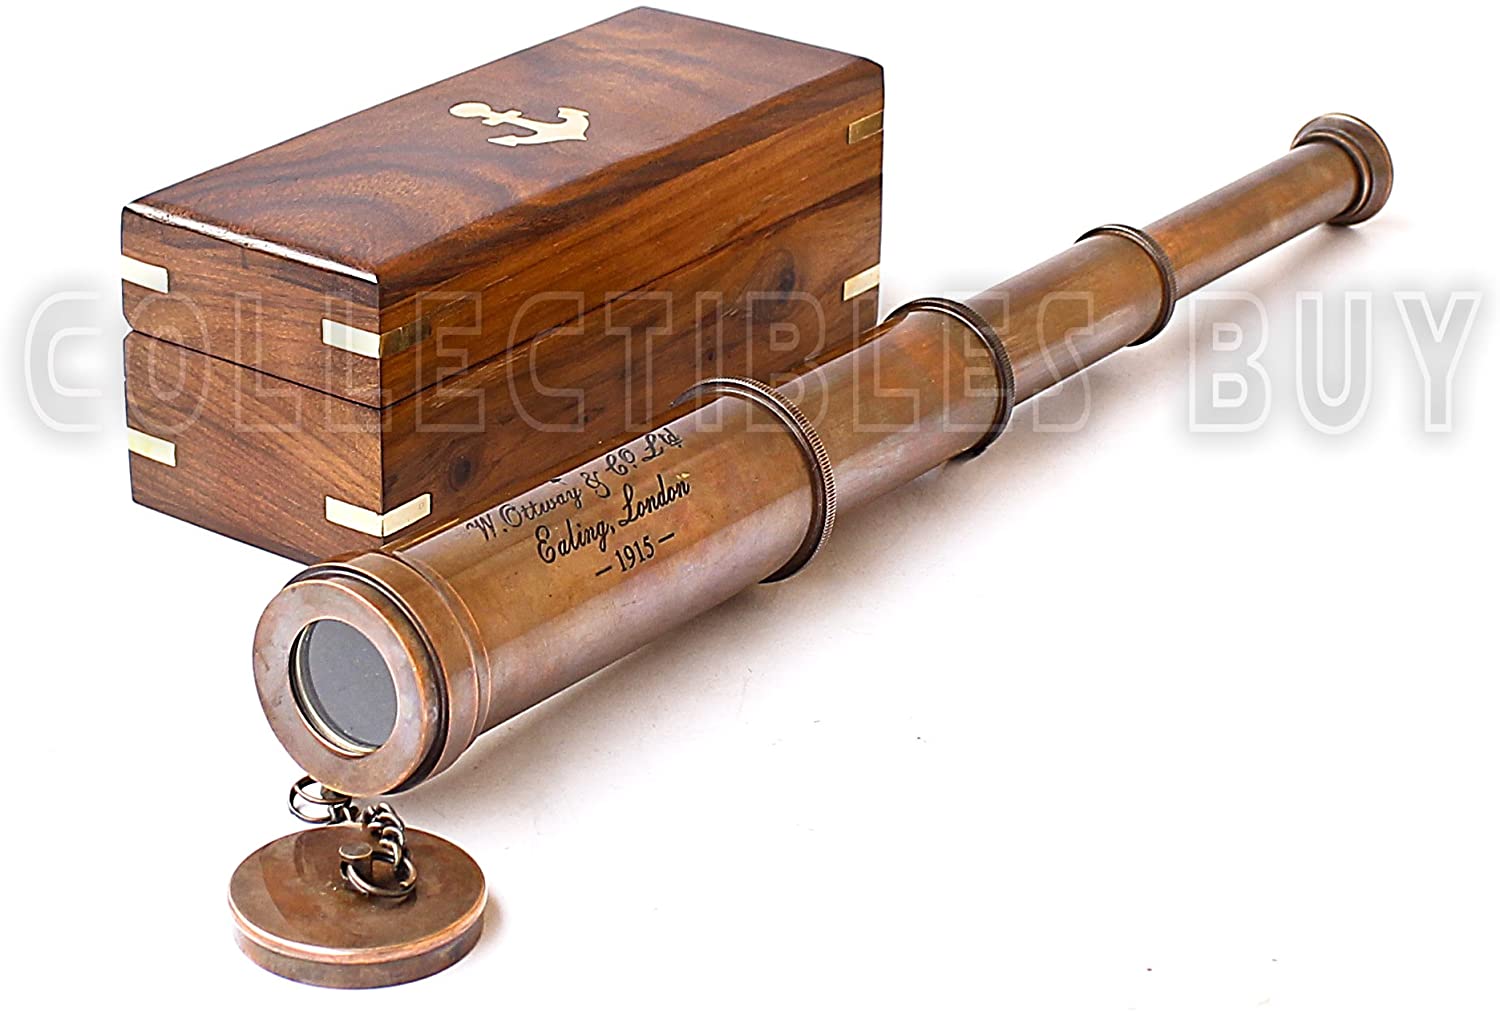 Vintage Telescope with Wooden Box